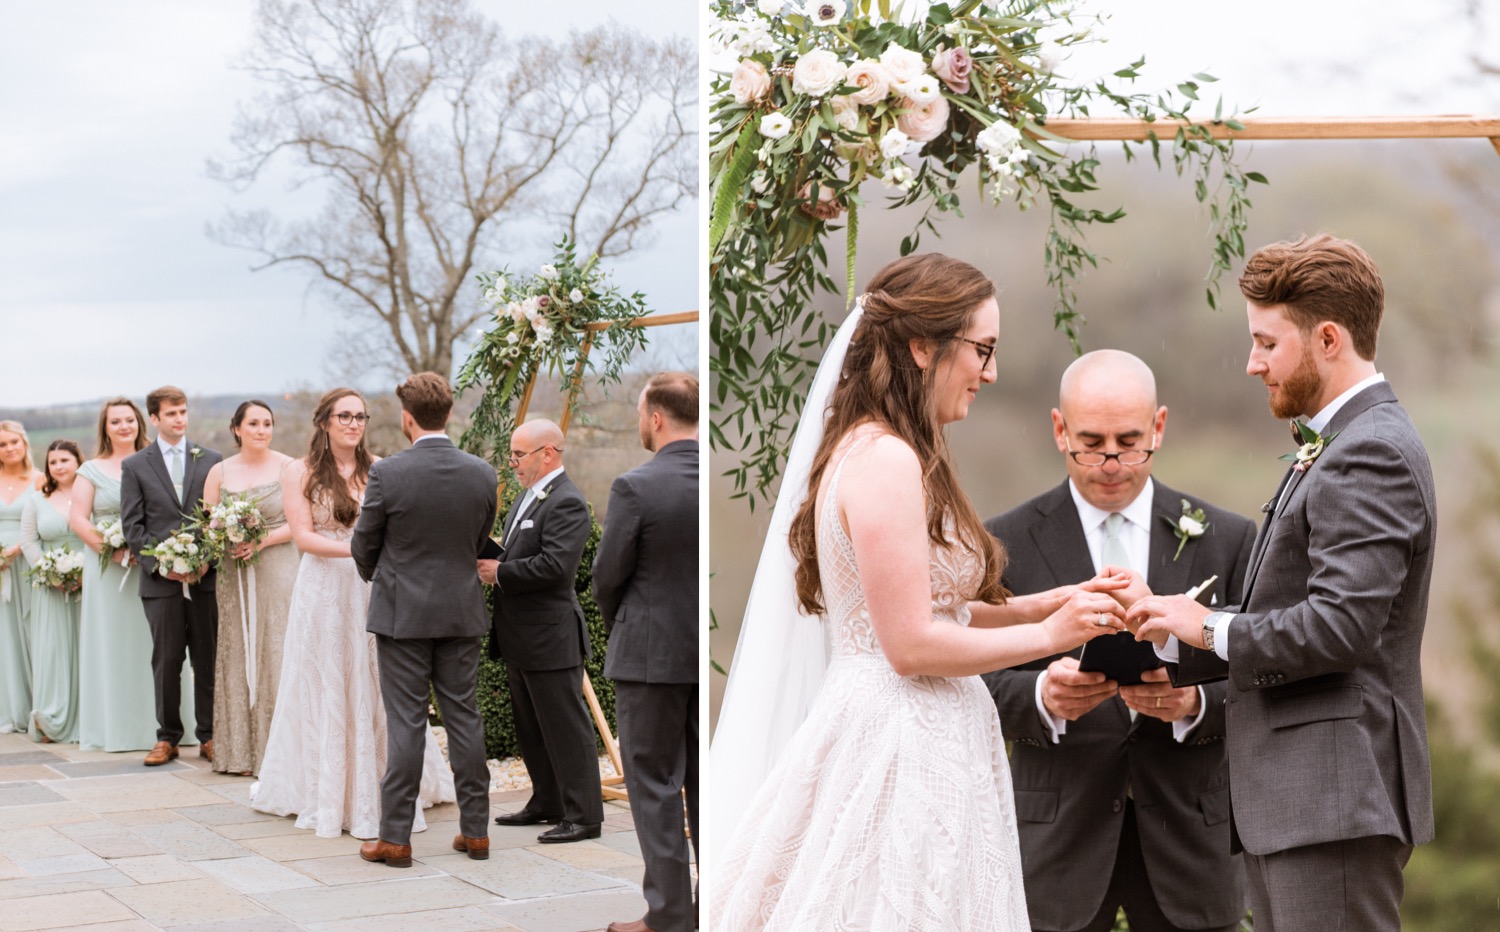 Bride and groom say "I do" during wedding at the Estate at River Run